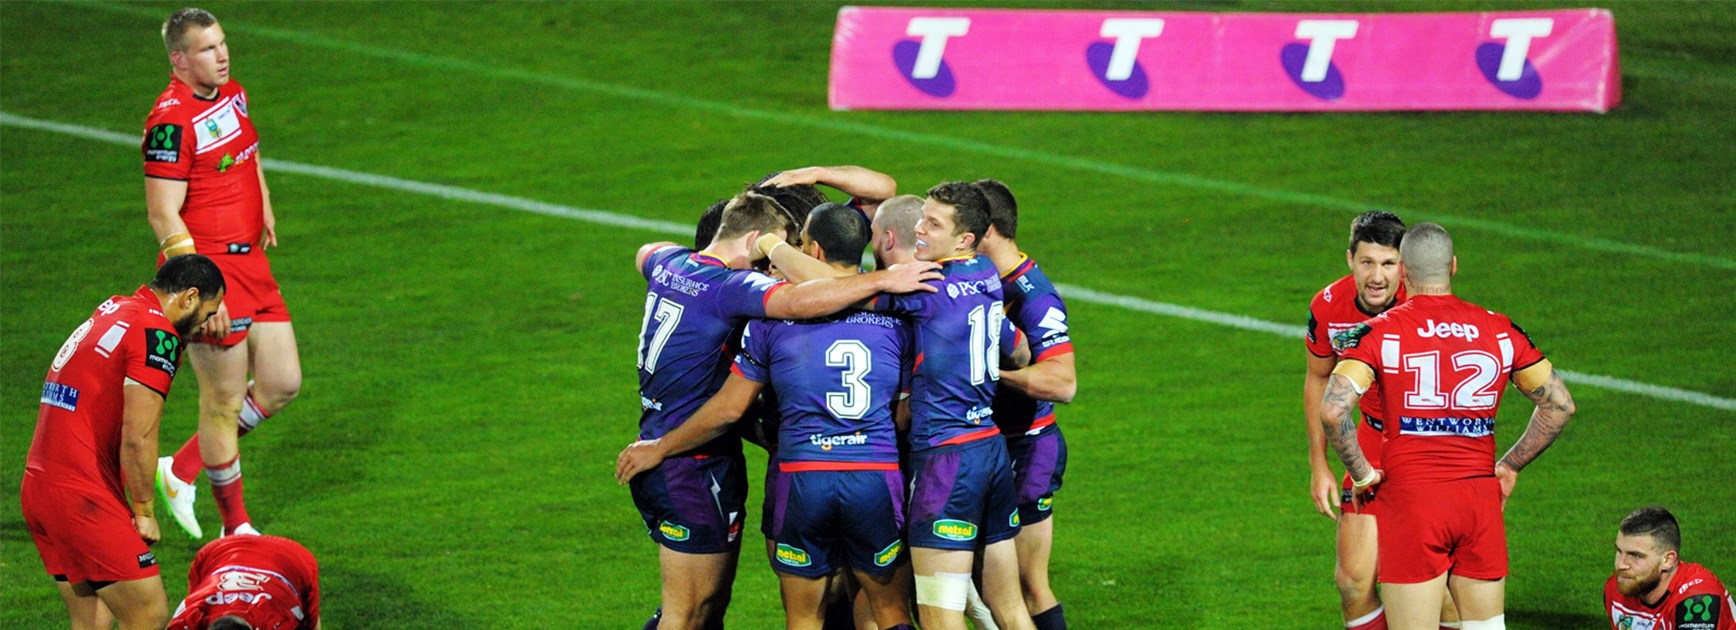 The Melbourne Storm handed the Dragons their seventh straight defeat on Saturday night.